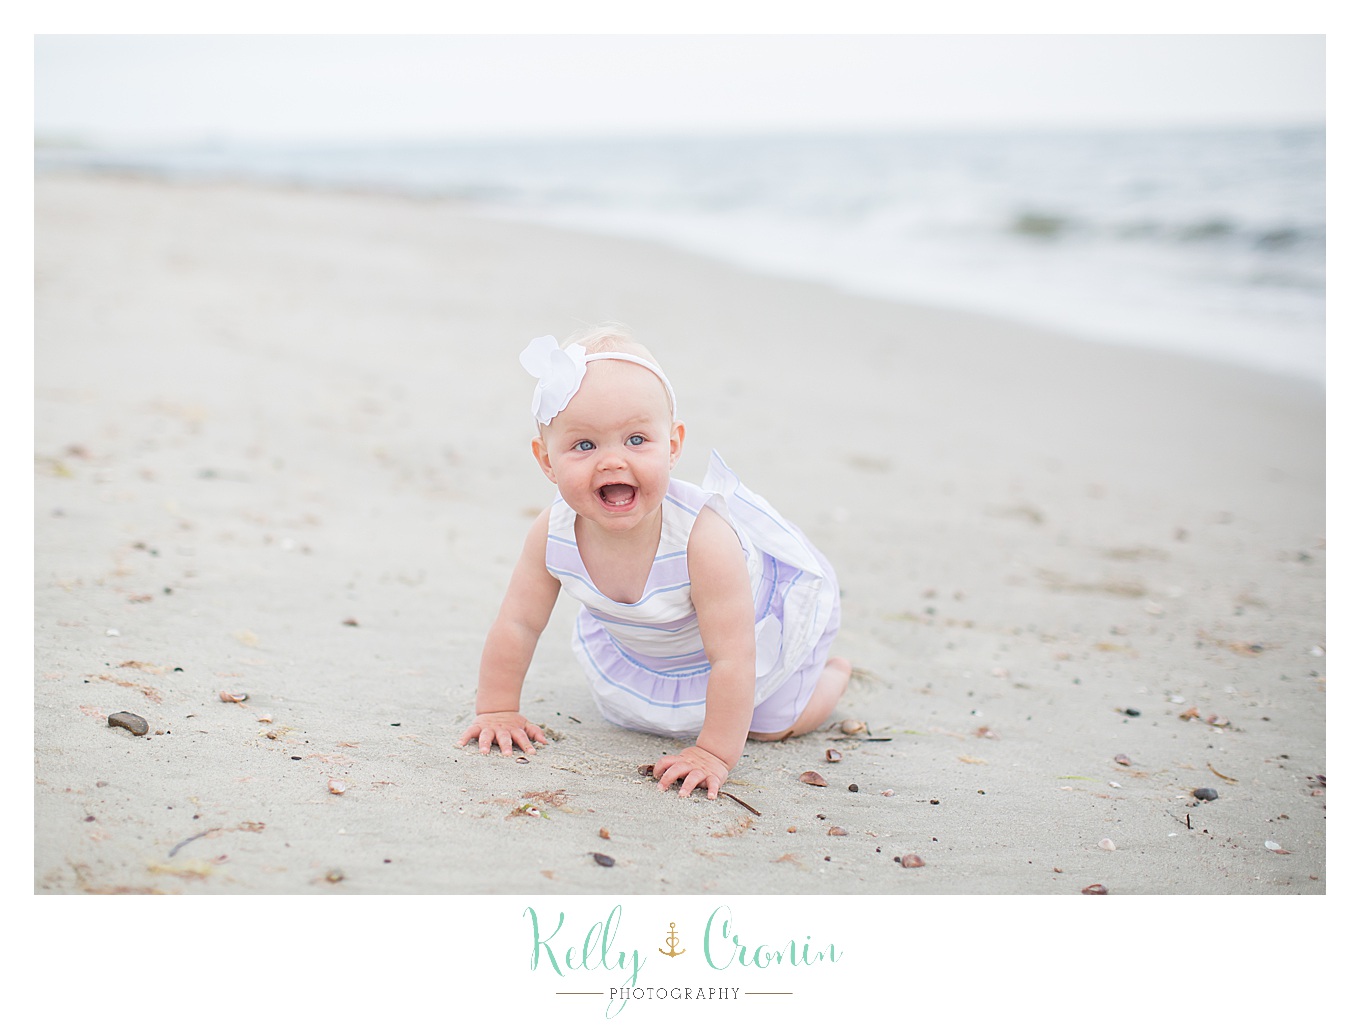 A baby crawls in the sand | Kelly Cronin Photography | Cape Cod Family Photographer